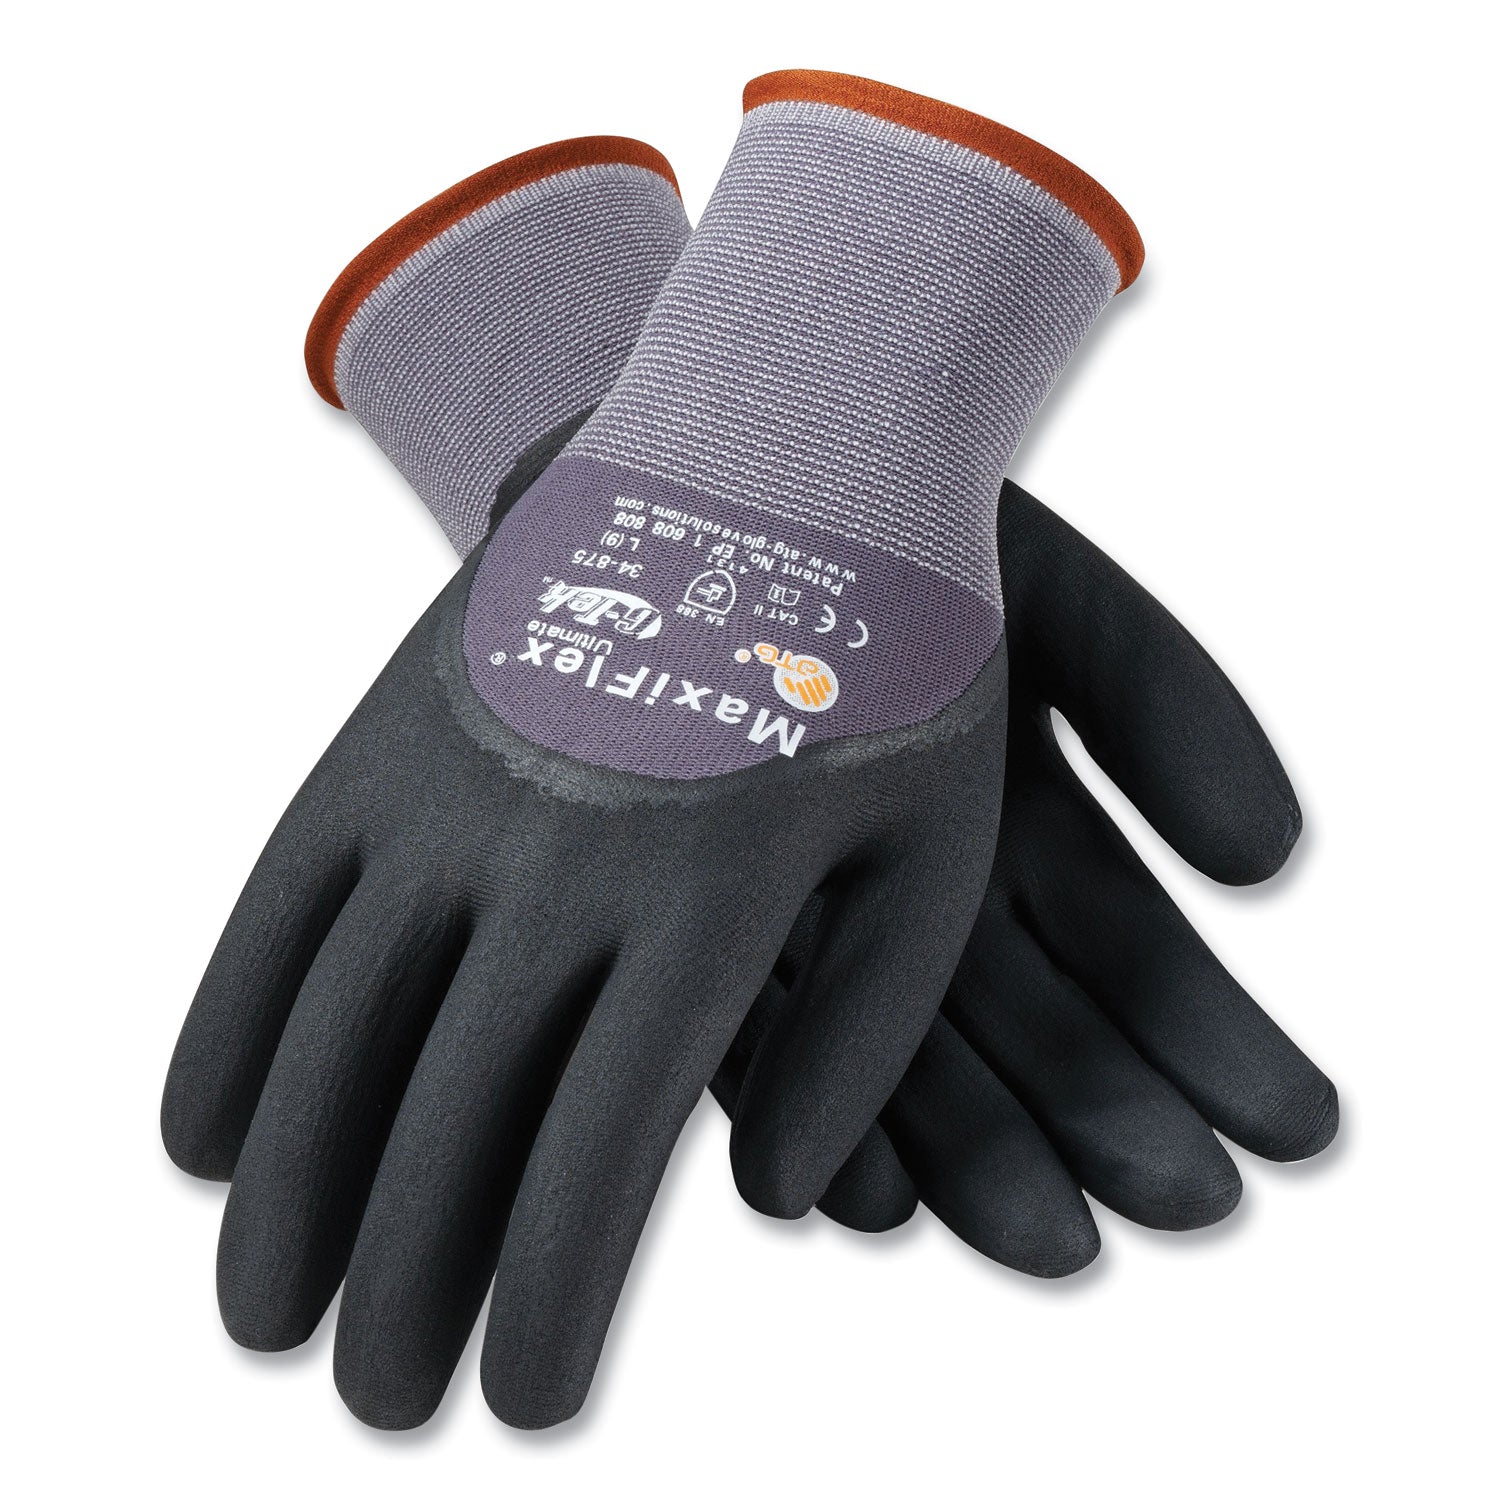 ultimate-seamless-knit-nylon-gloves-nitrile-coated-microfoam-grip-on-palm-fingers-and-knuckles-large-gray-12-pairs_pid34875l - 1